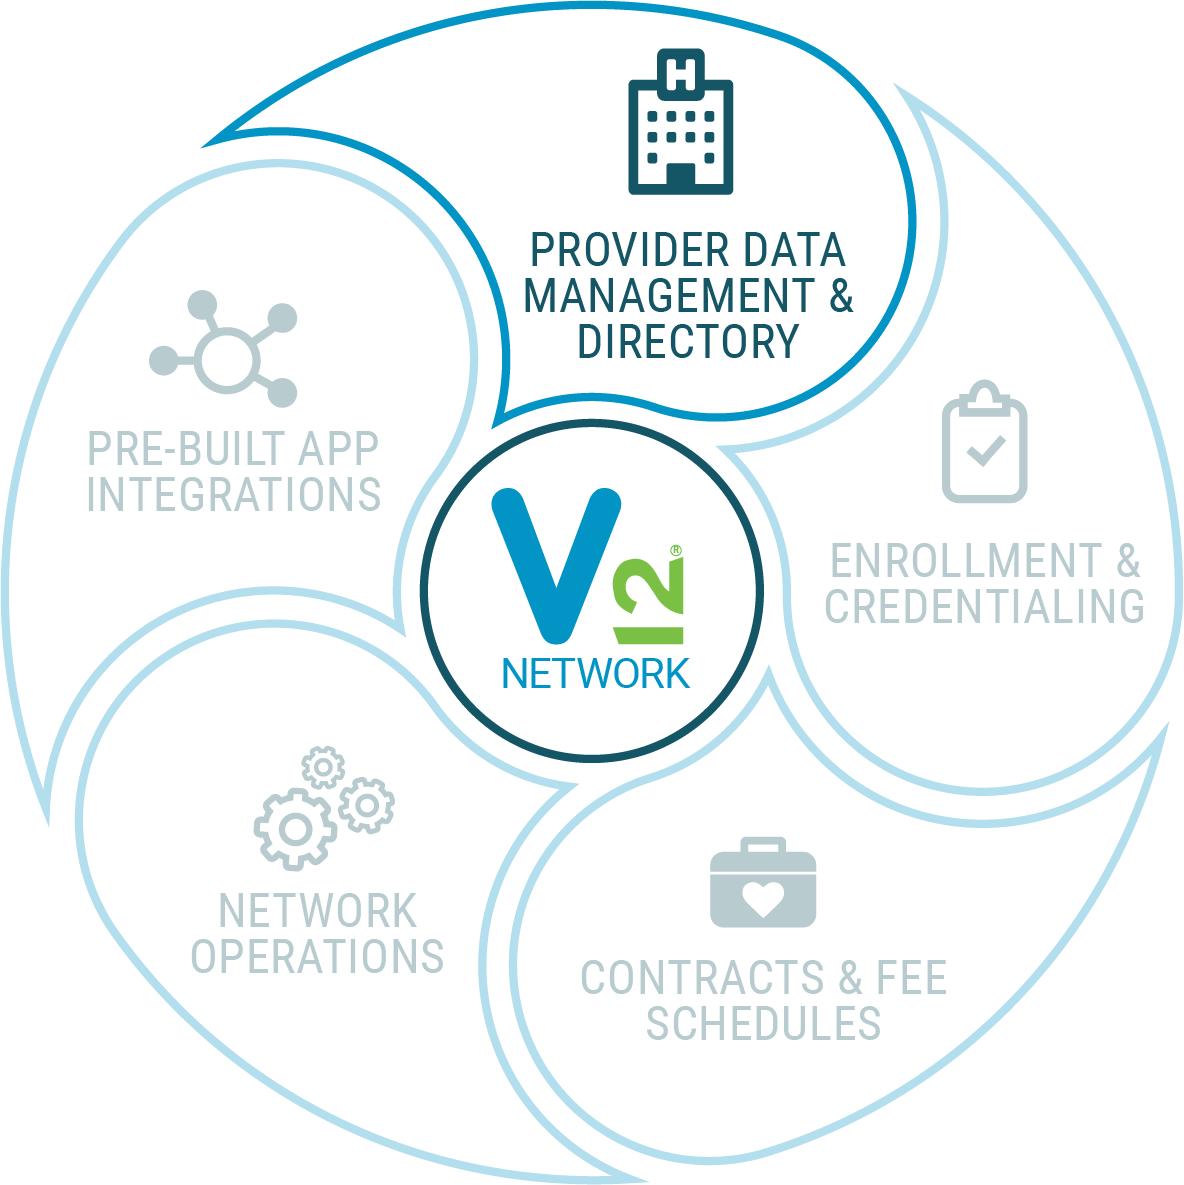 V12 Network Wheel - provider data management and directory